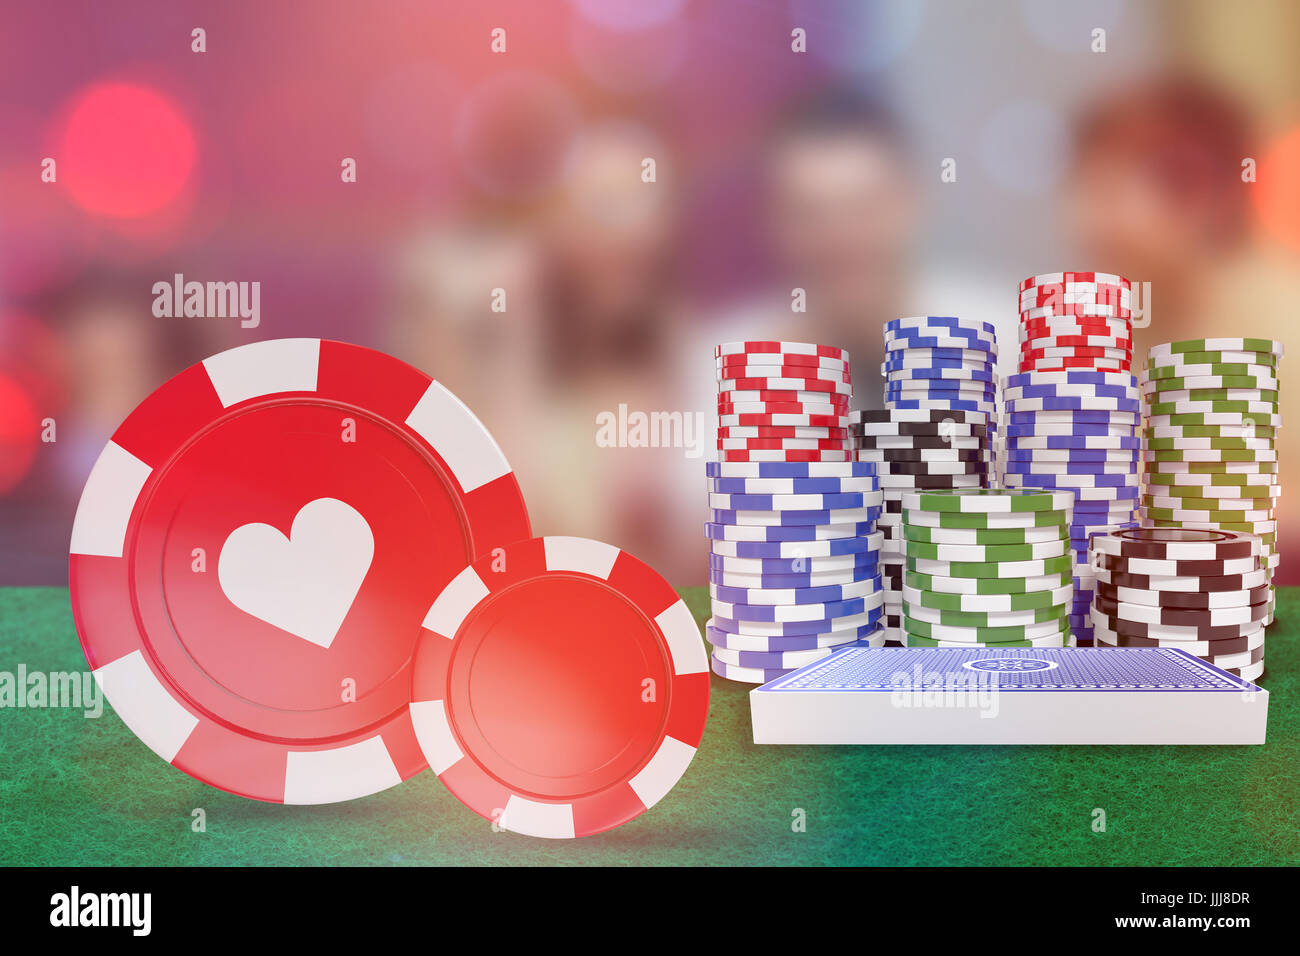 Composite image of vector 3d image of red casino token with hearts symbol Stock Photo